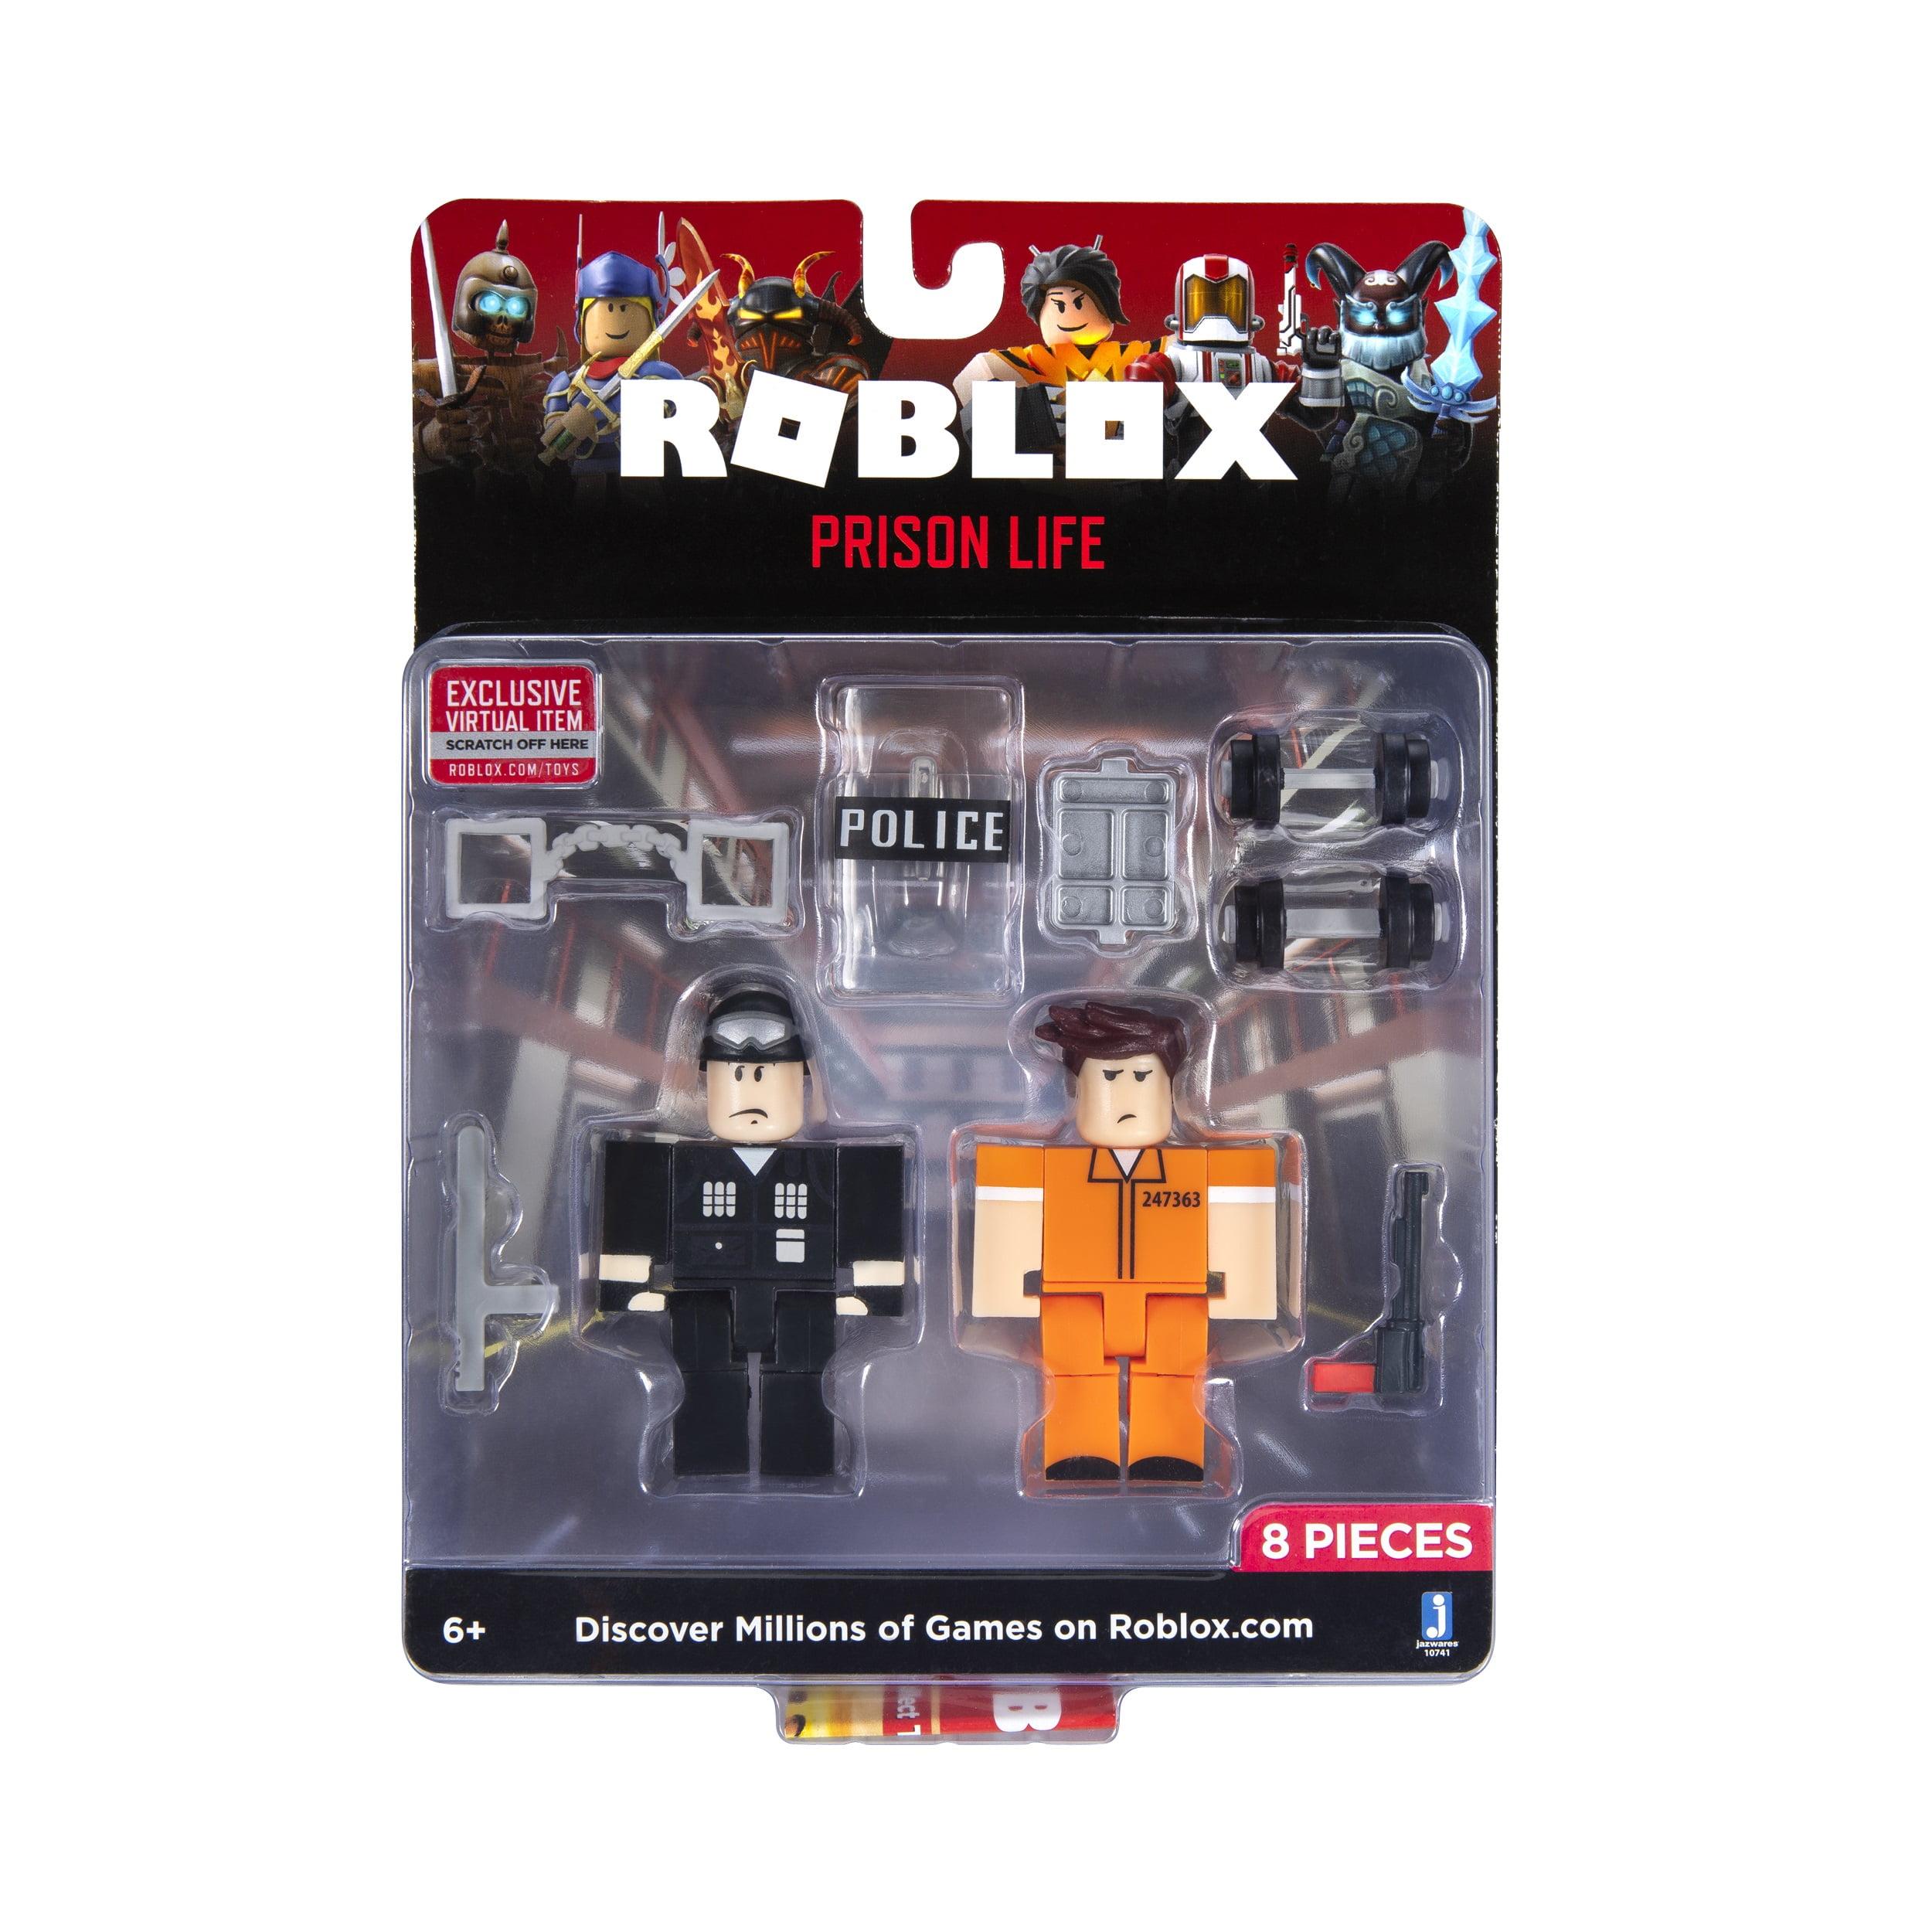 Roblox Action Collection Prison Life Game Pack Includes Exclusive Virtual Item Walmart Com Walmart Com - admin tools for roblox prison life